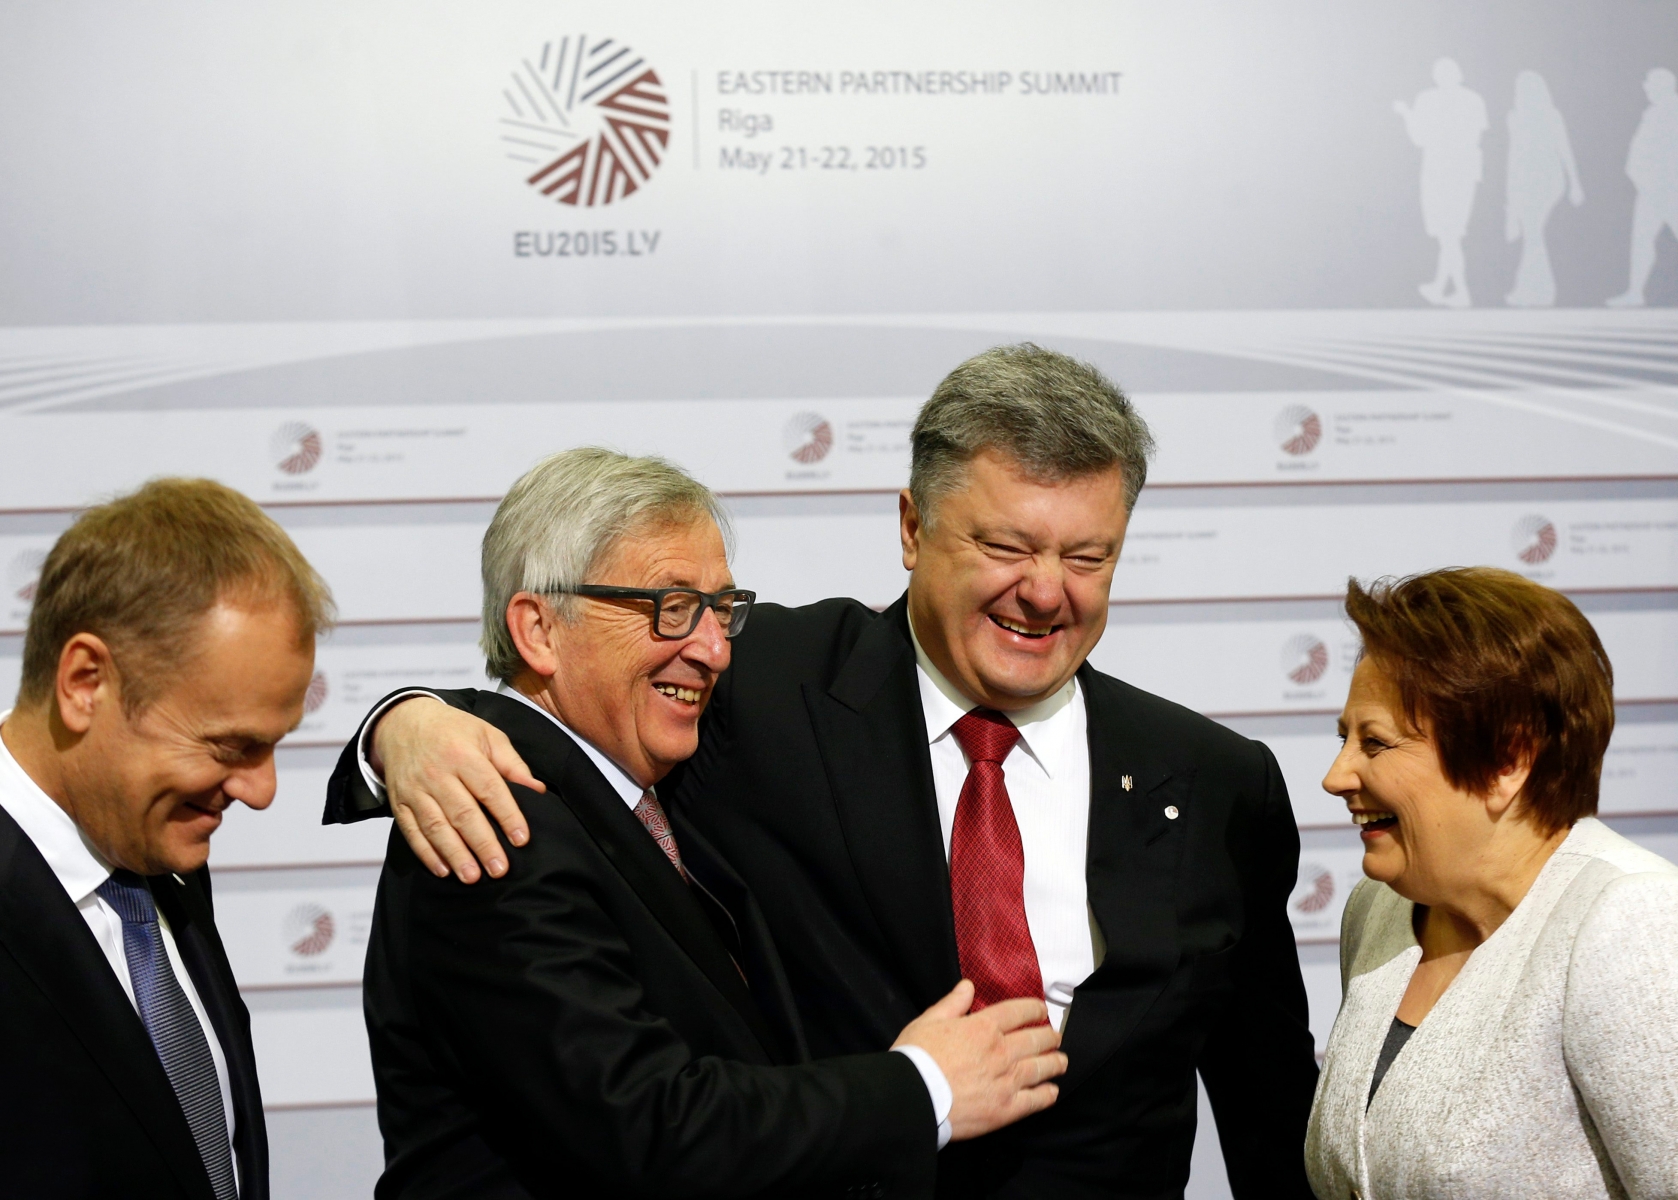 European Commission President Jean-Claude Juncker, center left, greets Ukrainian President Petro Poroshenko, center right, during arrivals at the Eastern Partnership summit in Riga, on Friday, May 22, 2015. EU leaders gather for a second day of meetings with six post-communist nations to discuss various issues, including enlargement, the economy and Ukraine. At left is European Council President Donald Tusk and right is Latvian Prime Minister Laimdota Straujuma. (AP Photo/Mindaugas Kulbis) LETTLAND EU GIPFEL OSTEUROPA